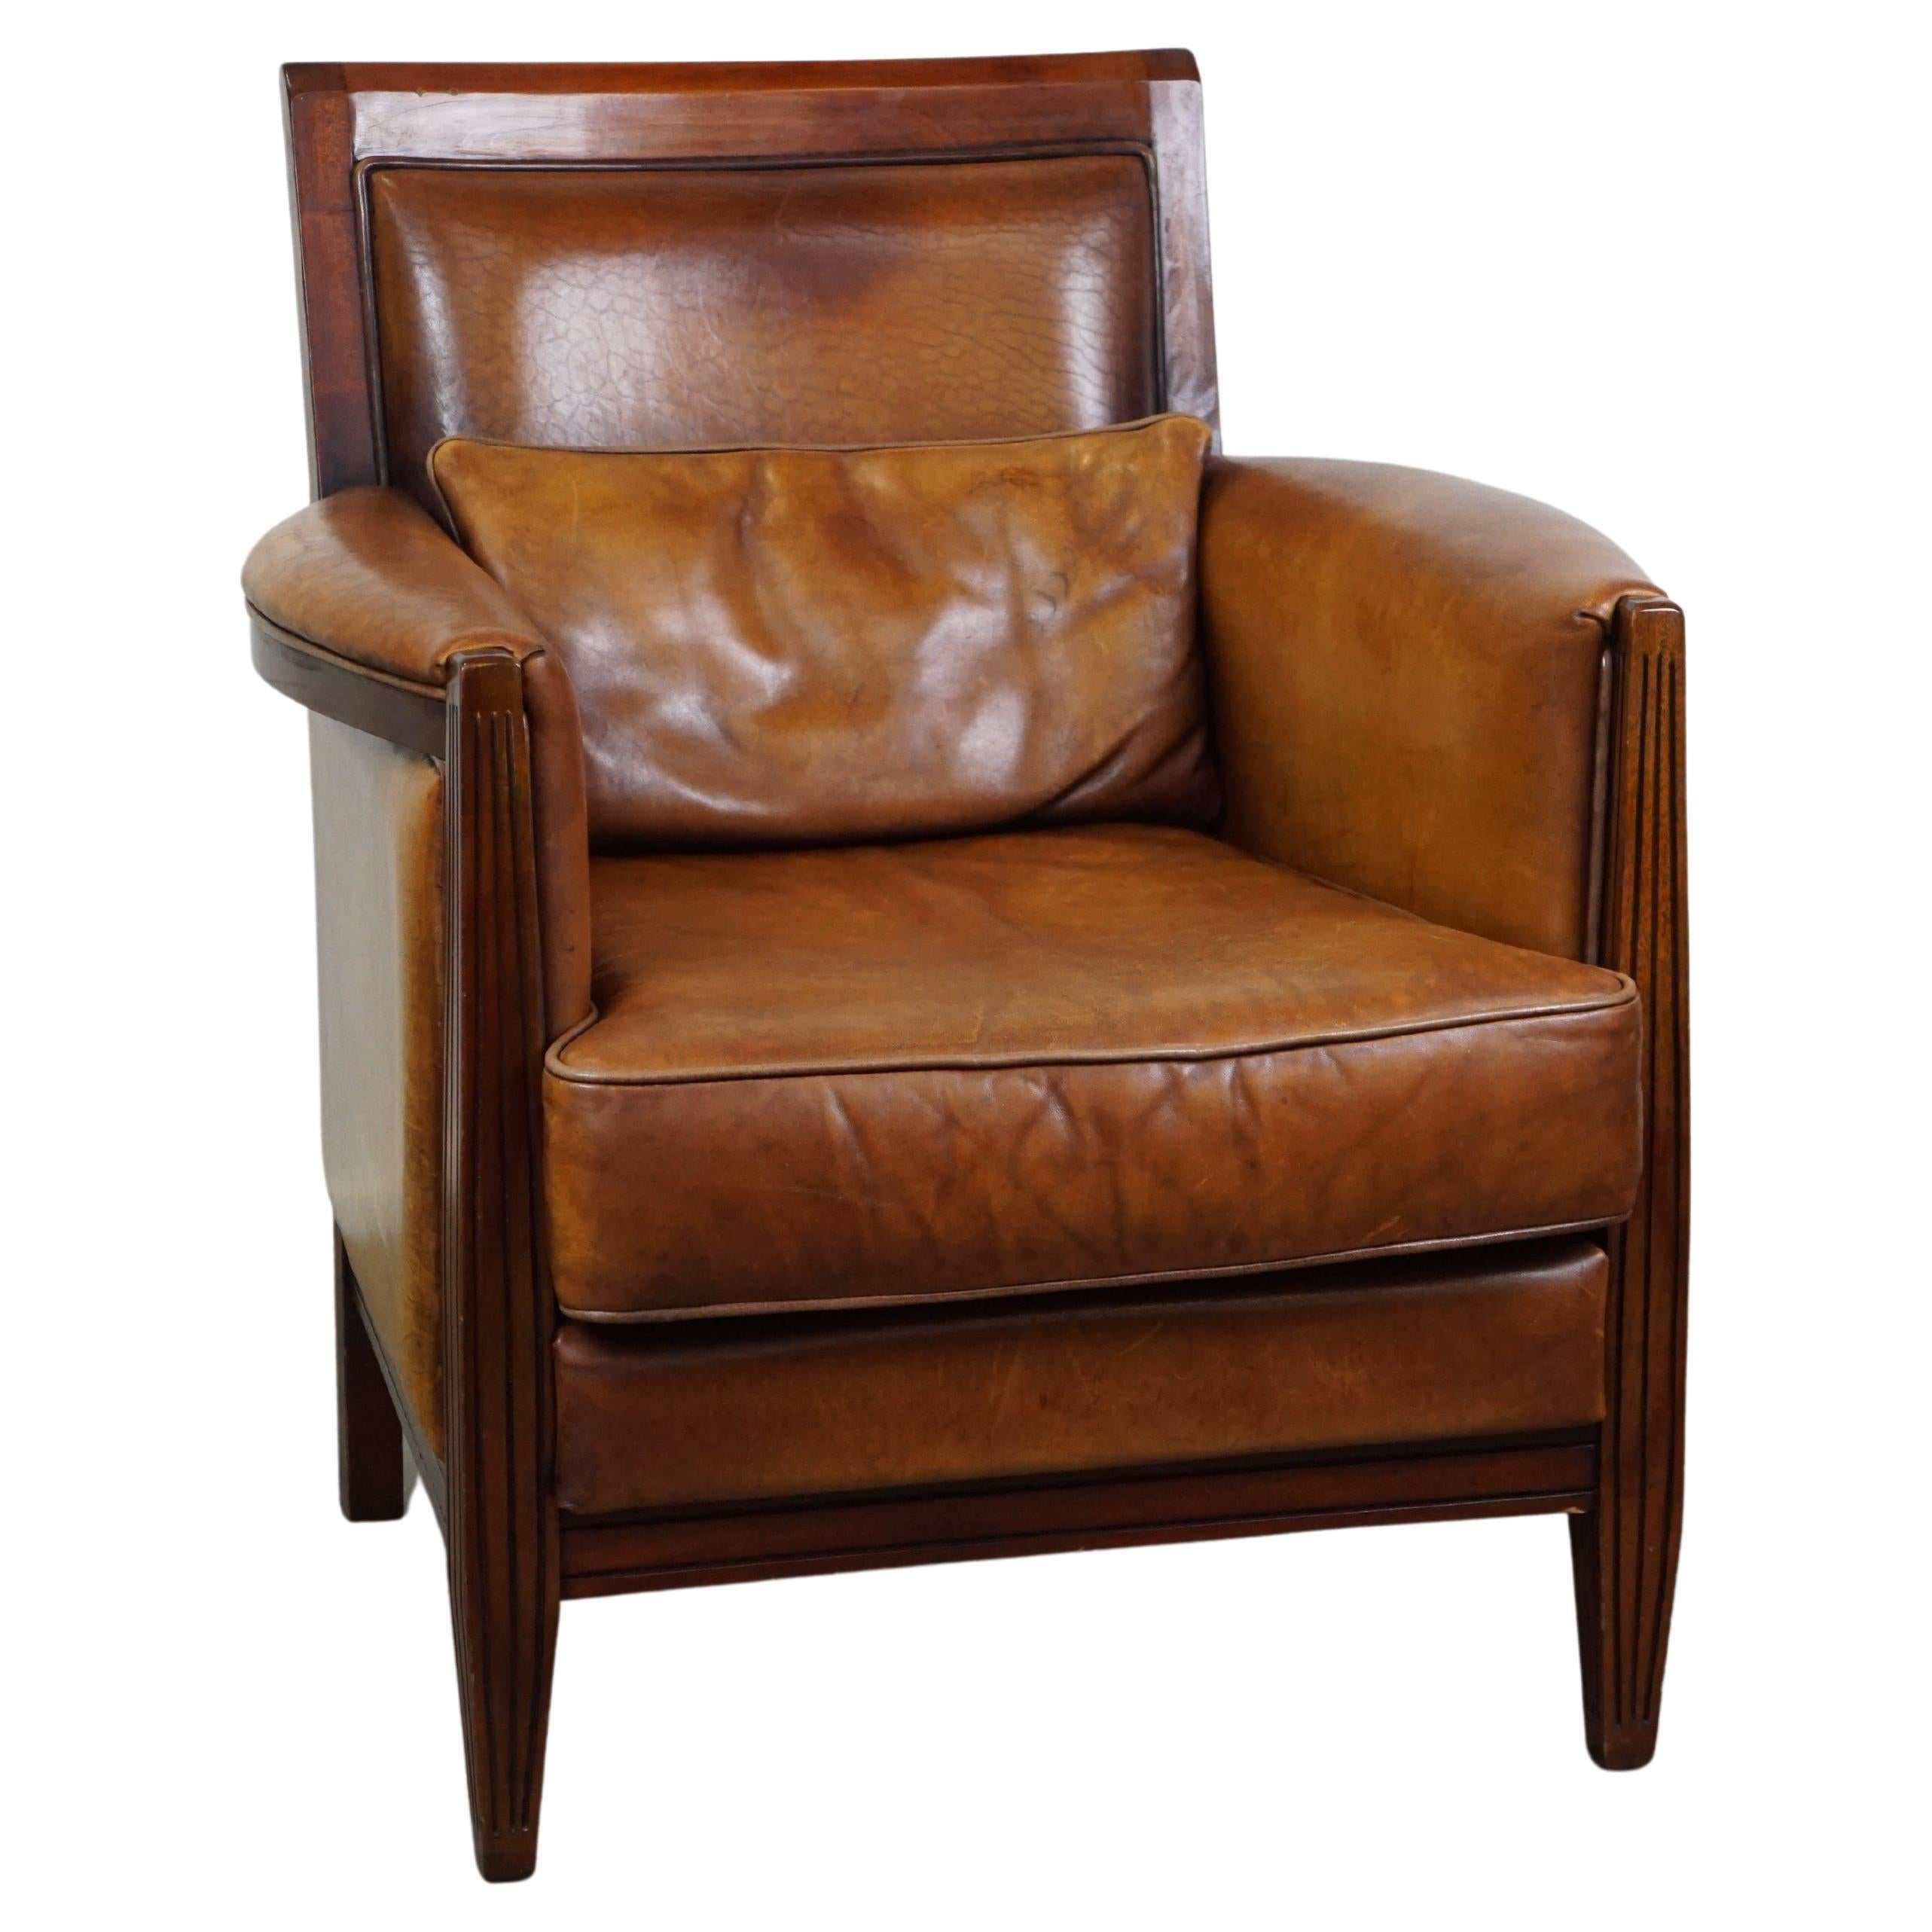 Sheep leather Art Deco design armchair with high seating comfort For Sale